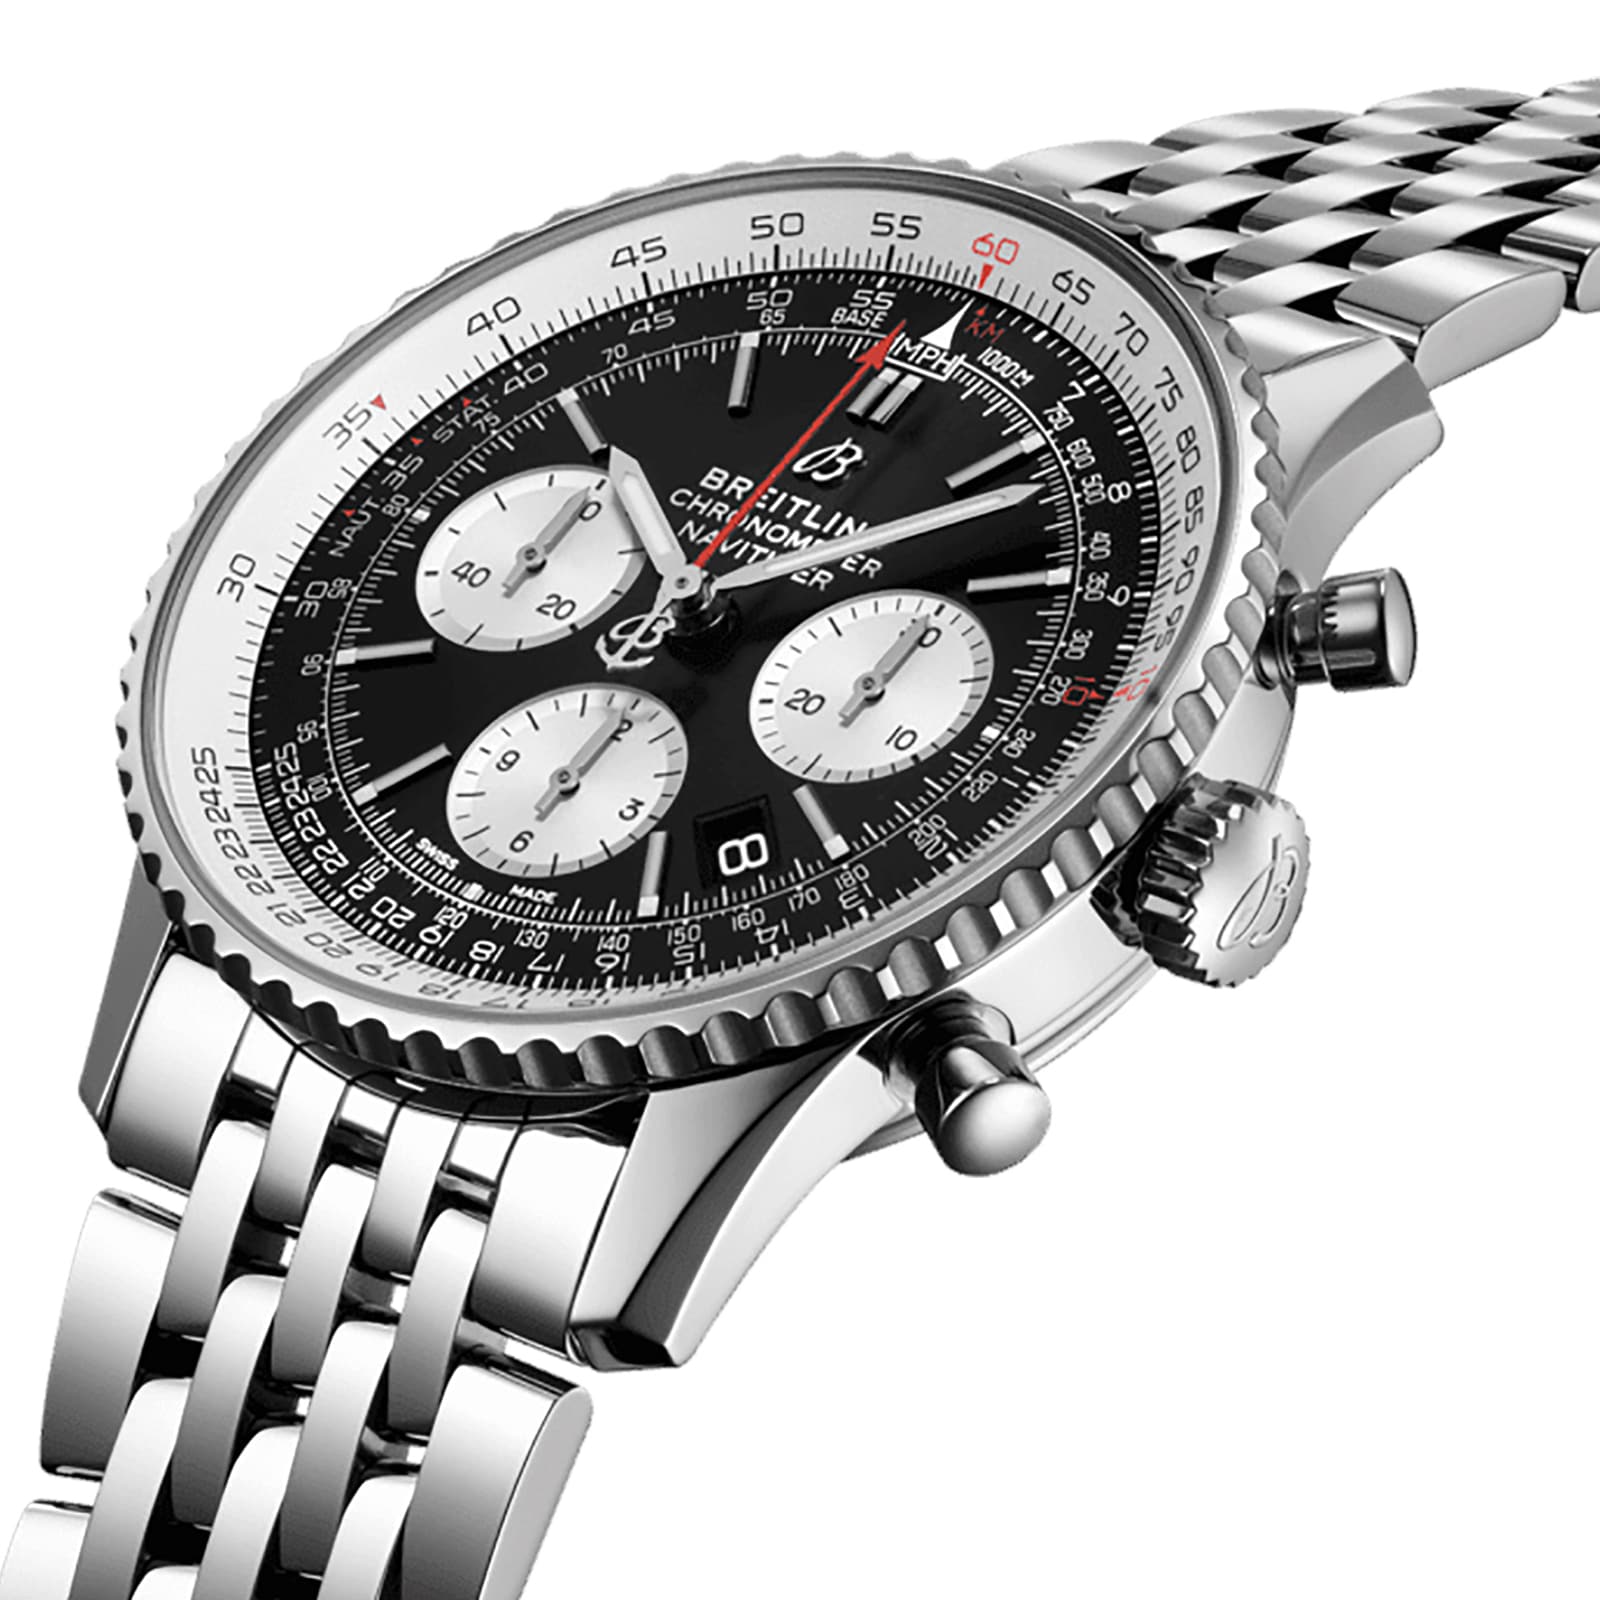 Breitling Navitimer B01 Chronograph 43 Stainless Steel Watch ...